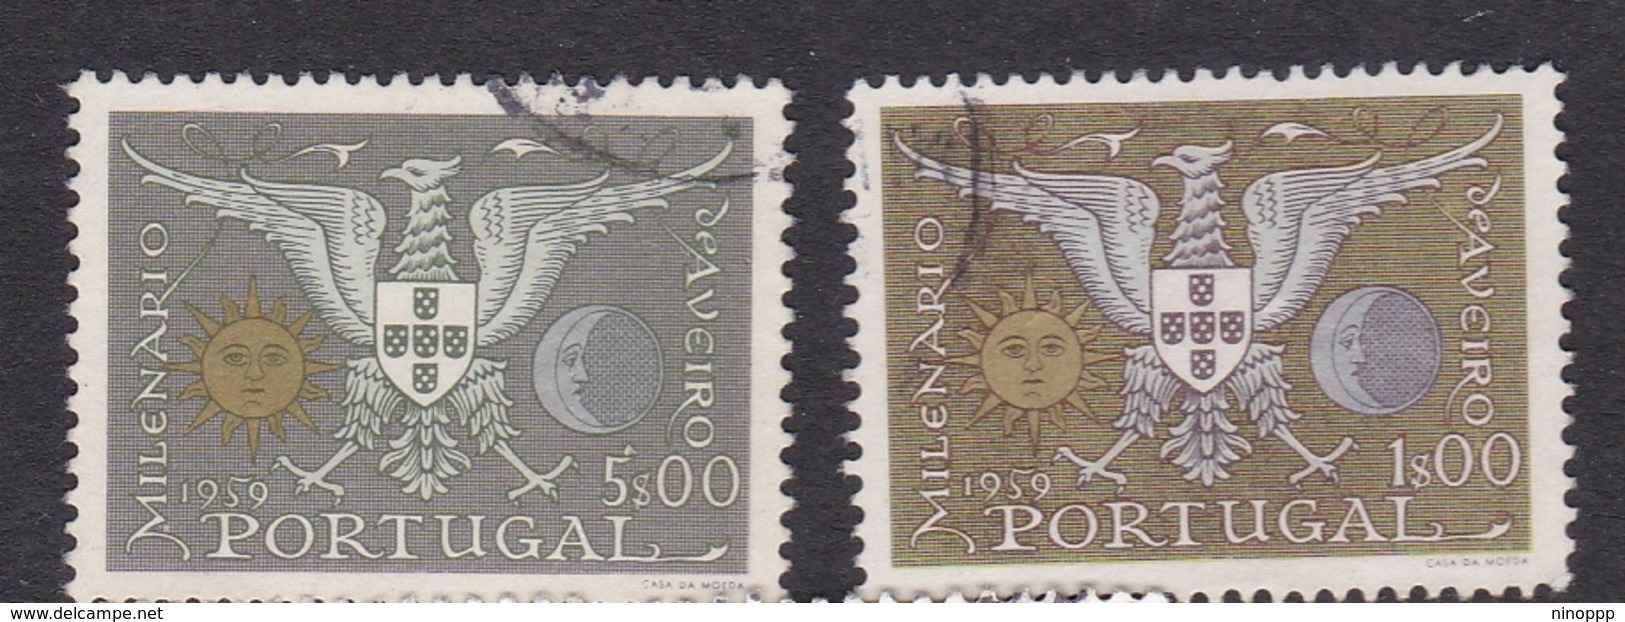 Portugal SG 1162-1163 1959 Millenary Of Aveiro, Used - Used Stamps